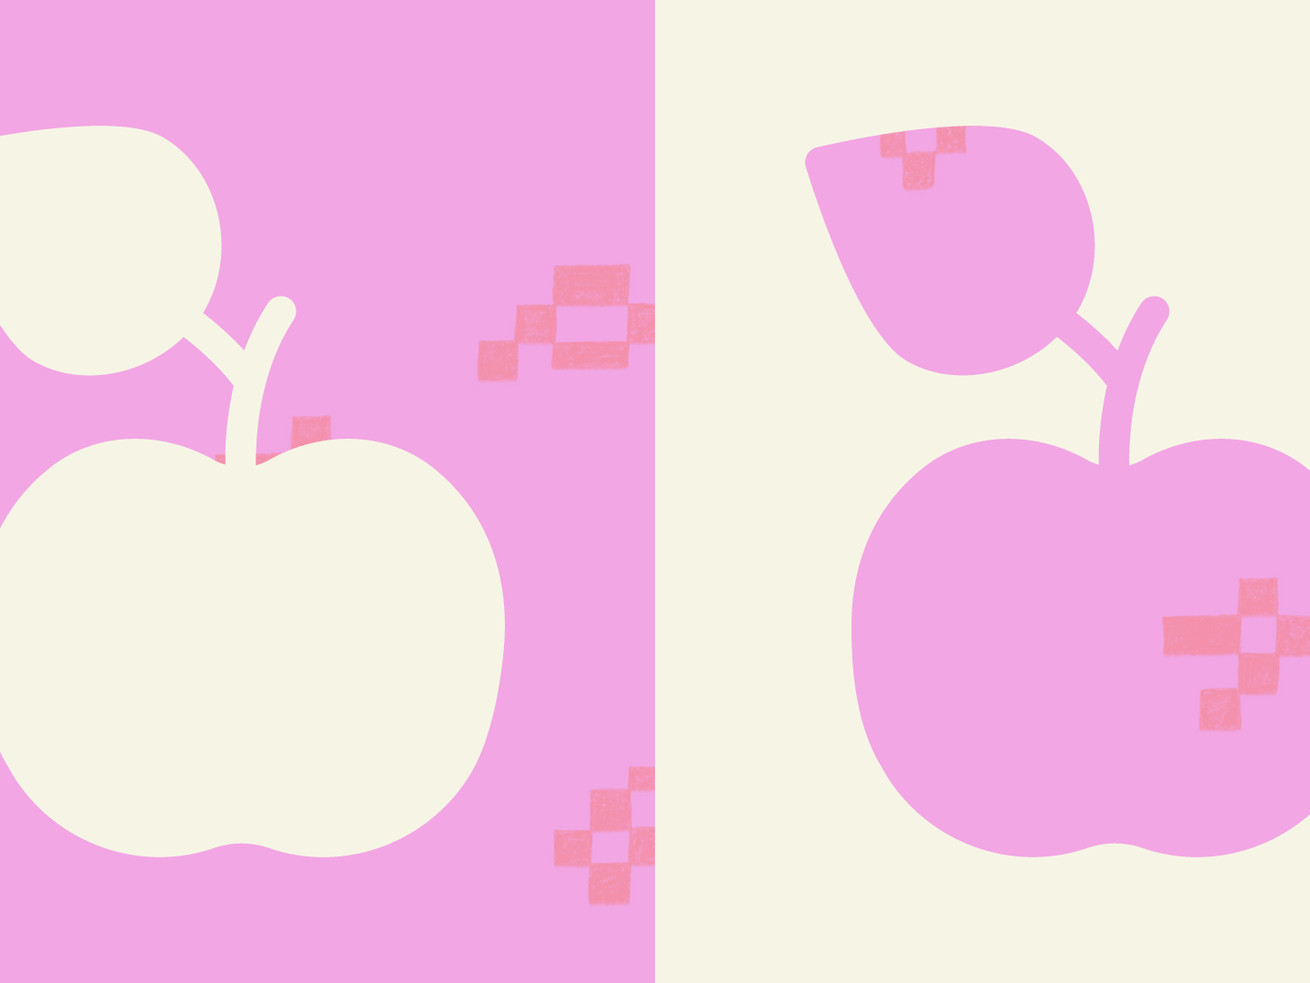 A pixelated rectangular field is split into two halves. The left half is pink and contains a white apple. The right half is white and contains an identical pink apple.